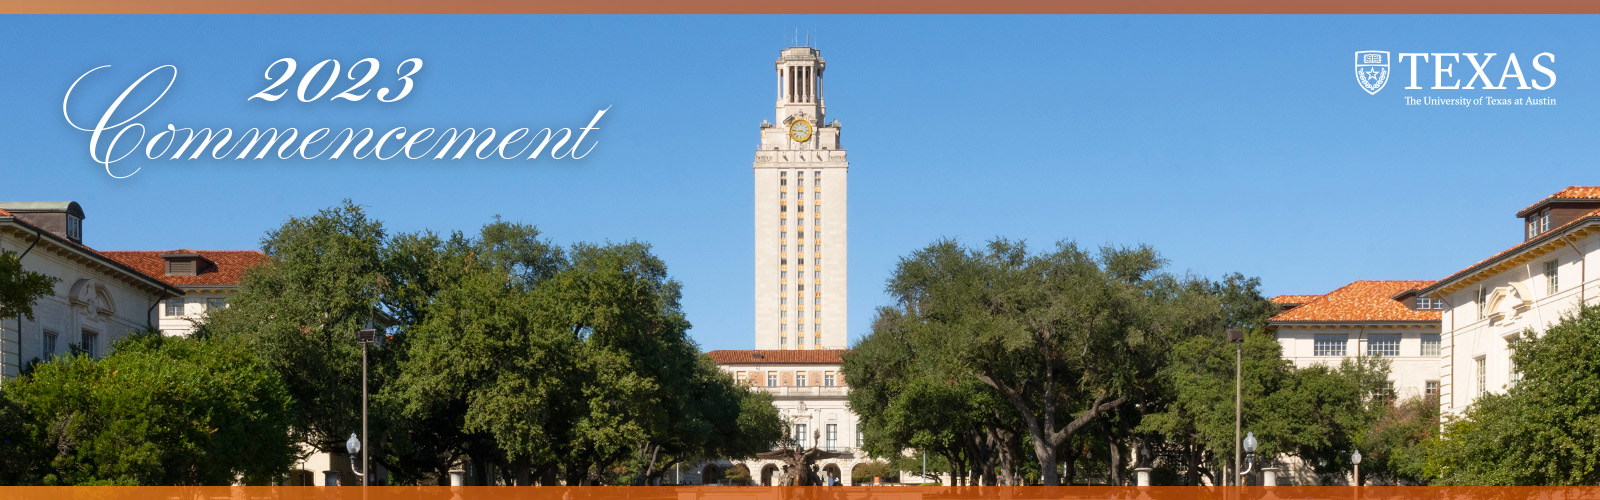 Please join us for the 140th Commencement of the University of Texas at Austin